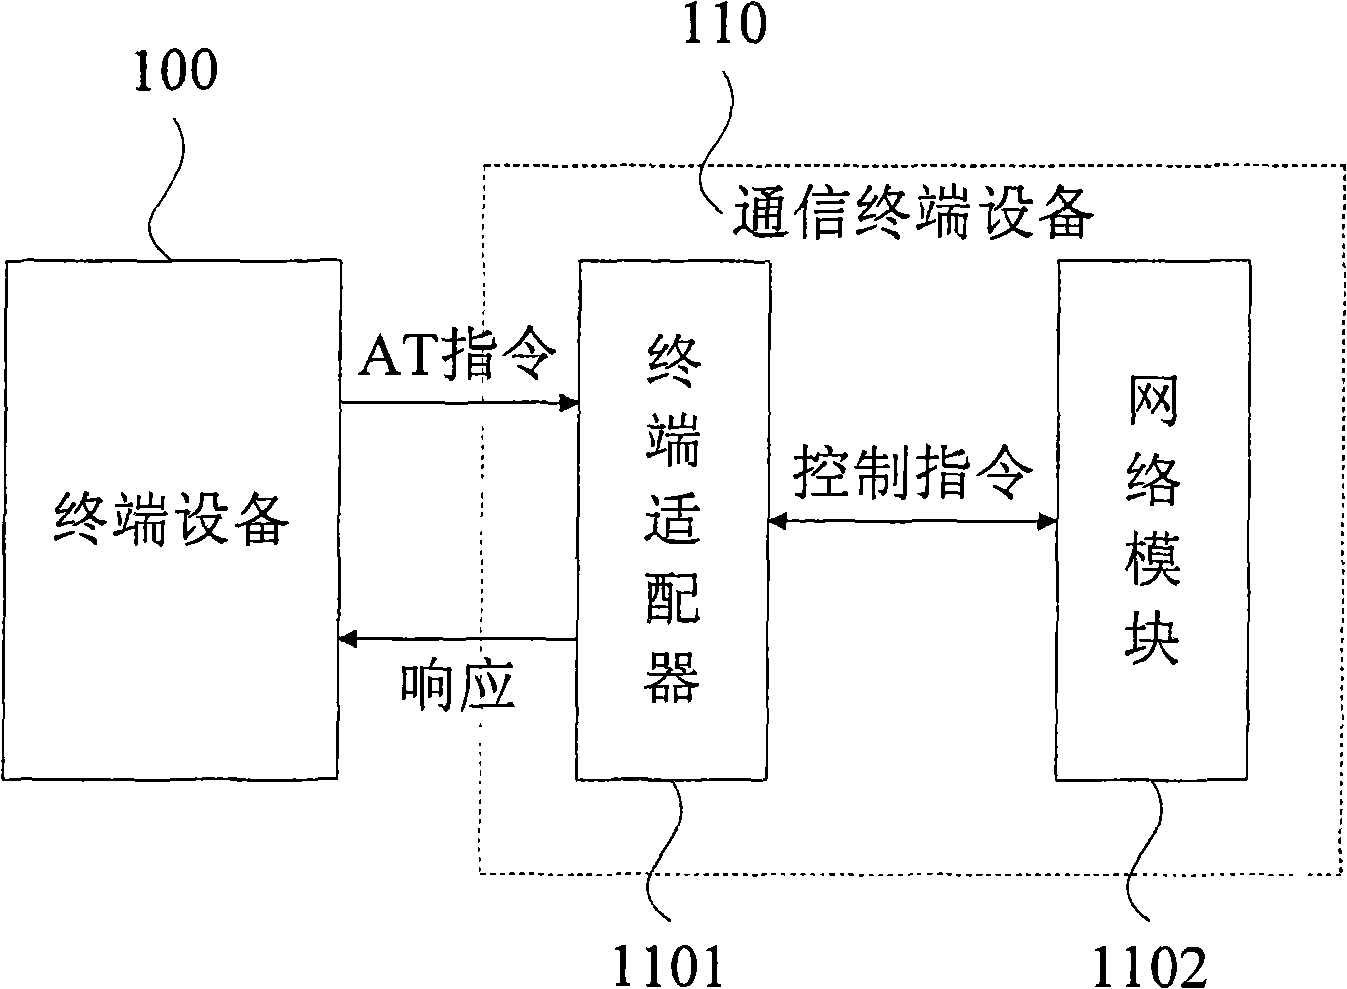 Controlling method and system for mobile communication terminal